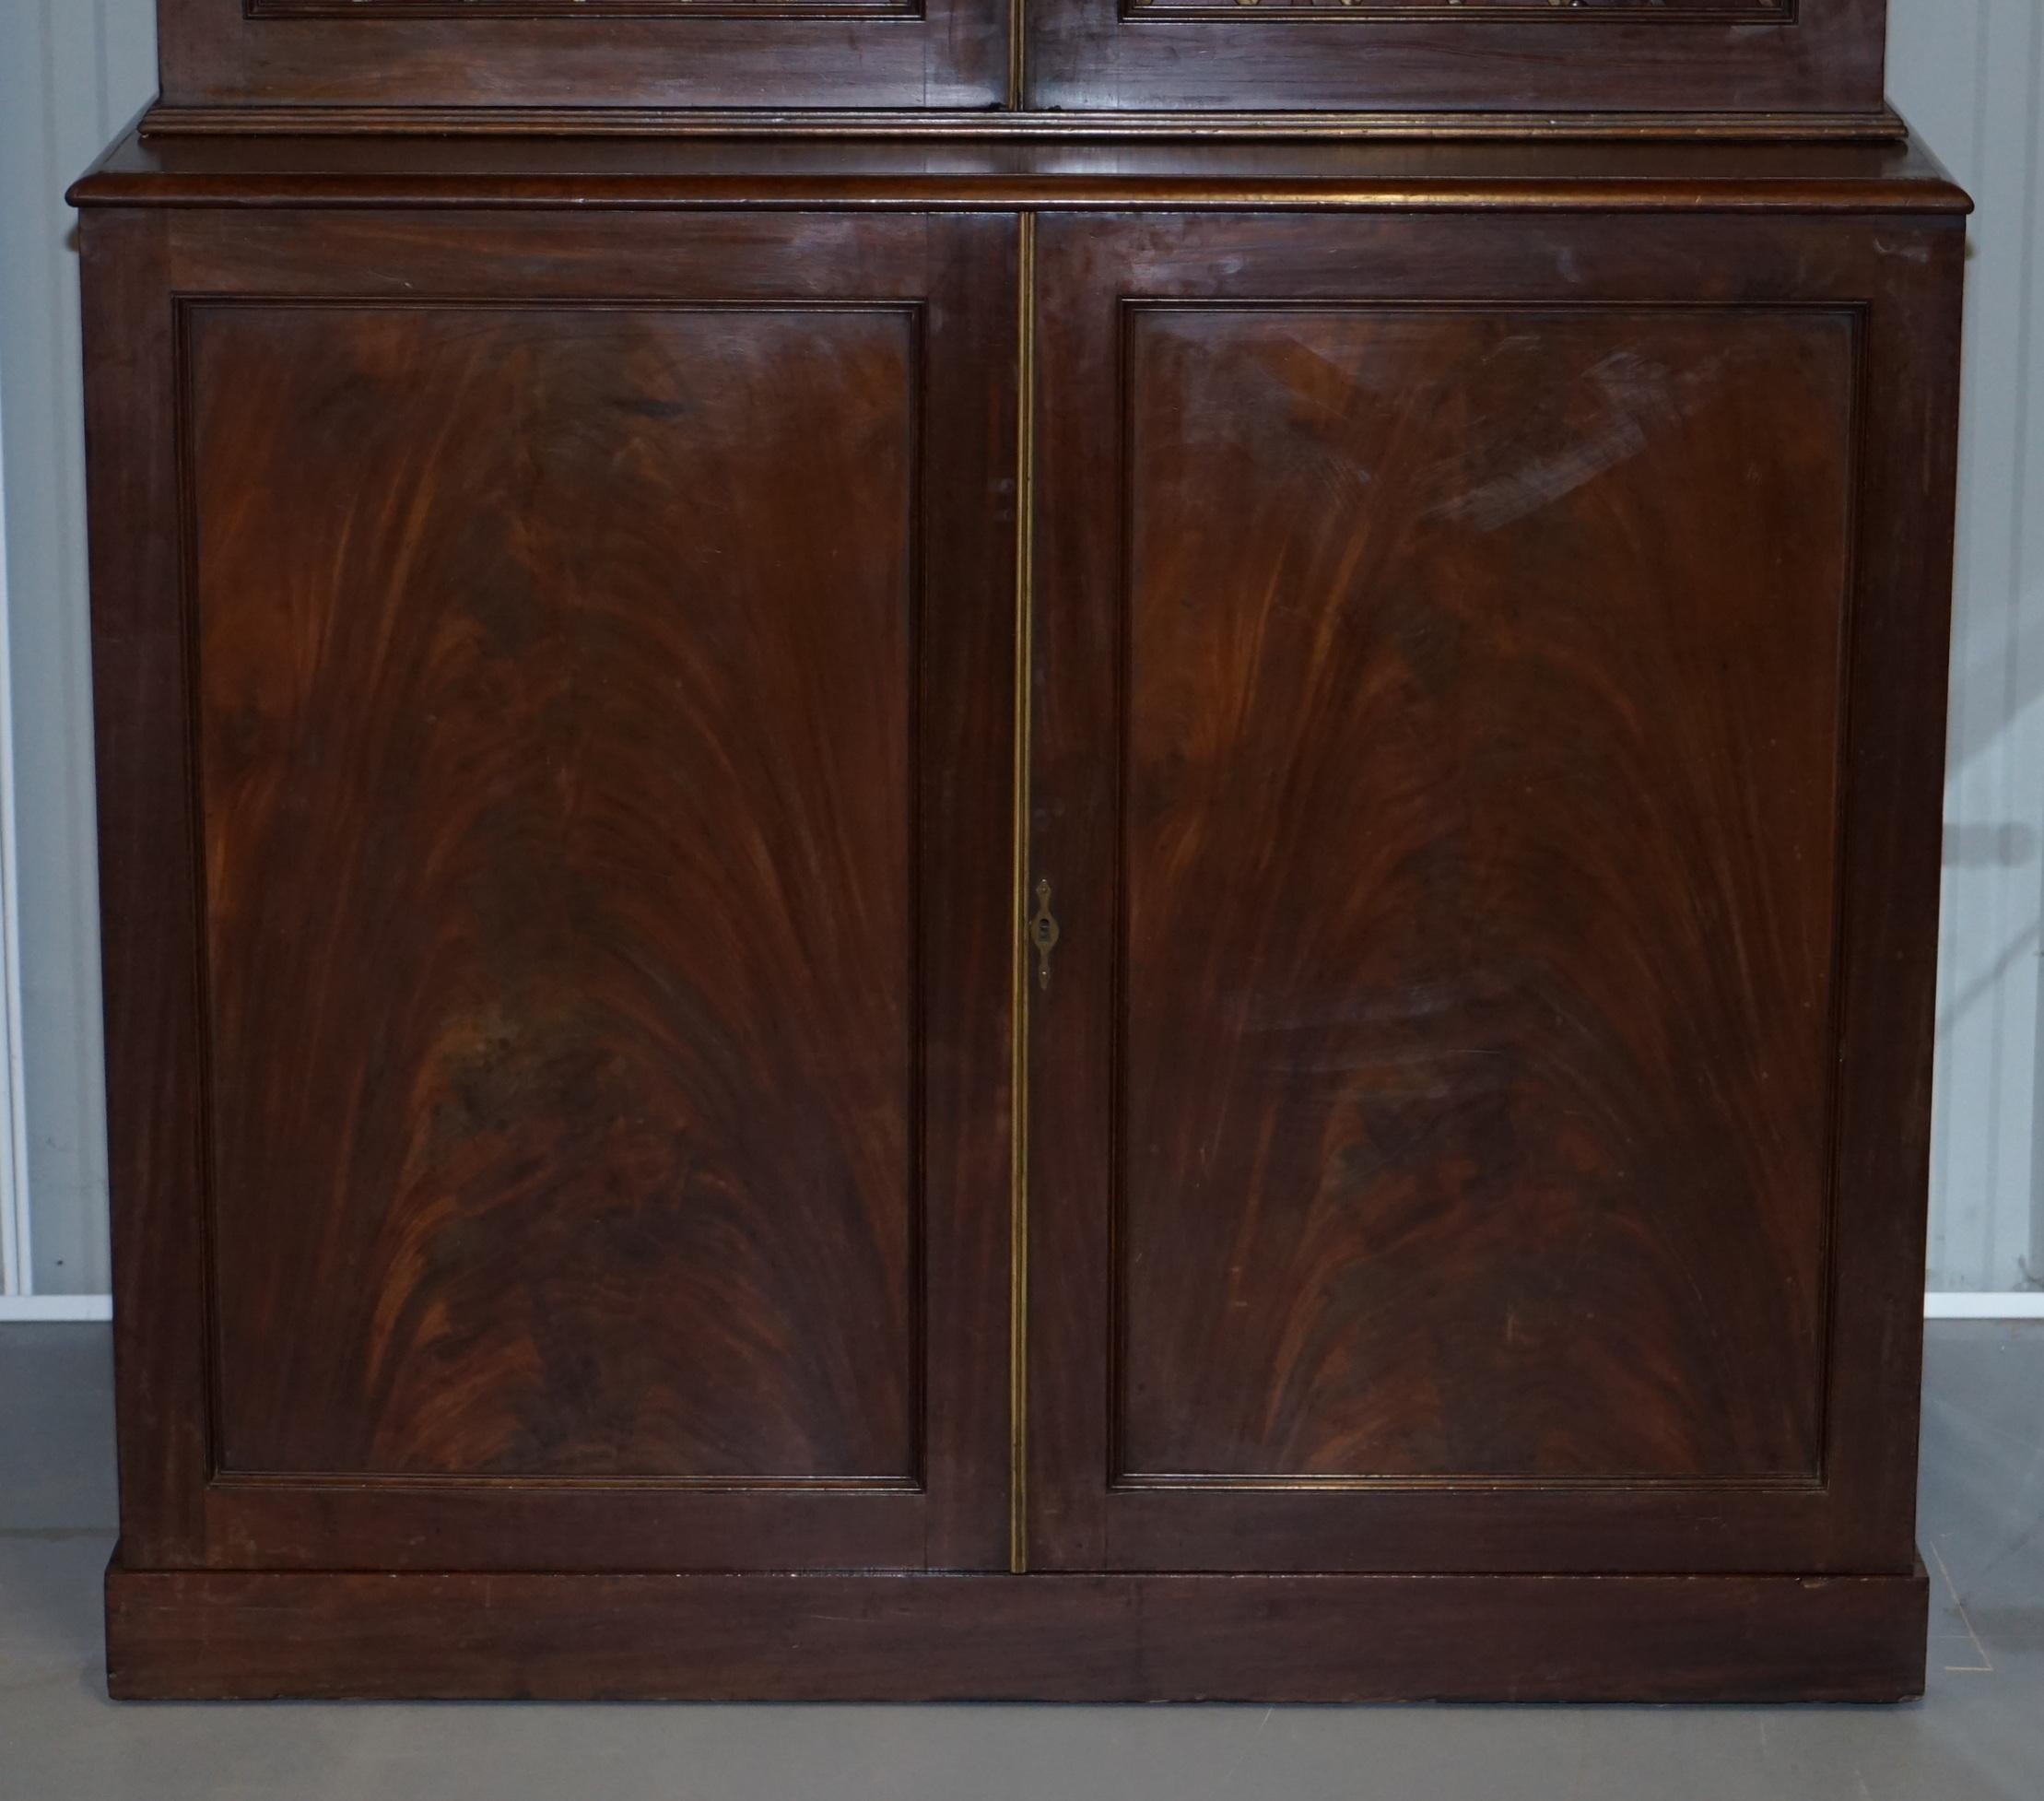 Hand-Crafted Rare 19th Century Mahogany Pierced Bronzed Door Bookcase with Chest of Drawers